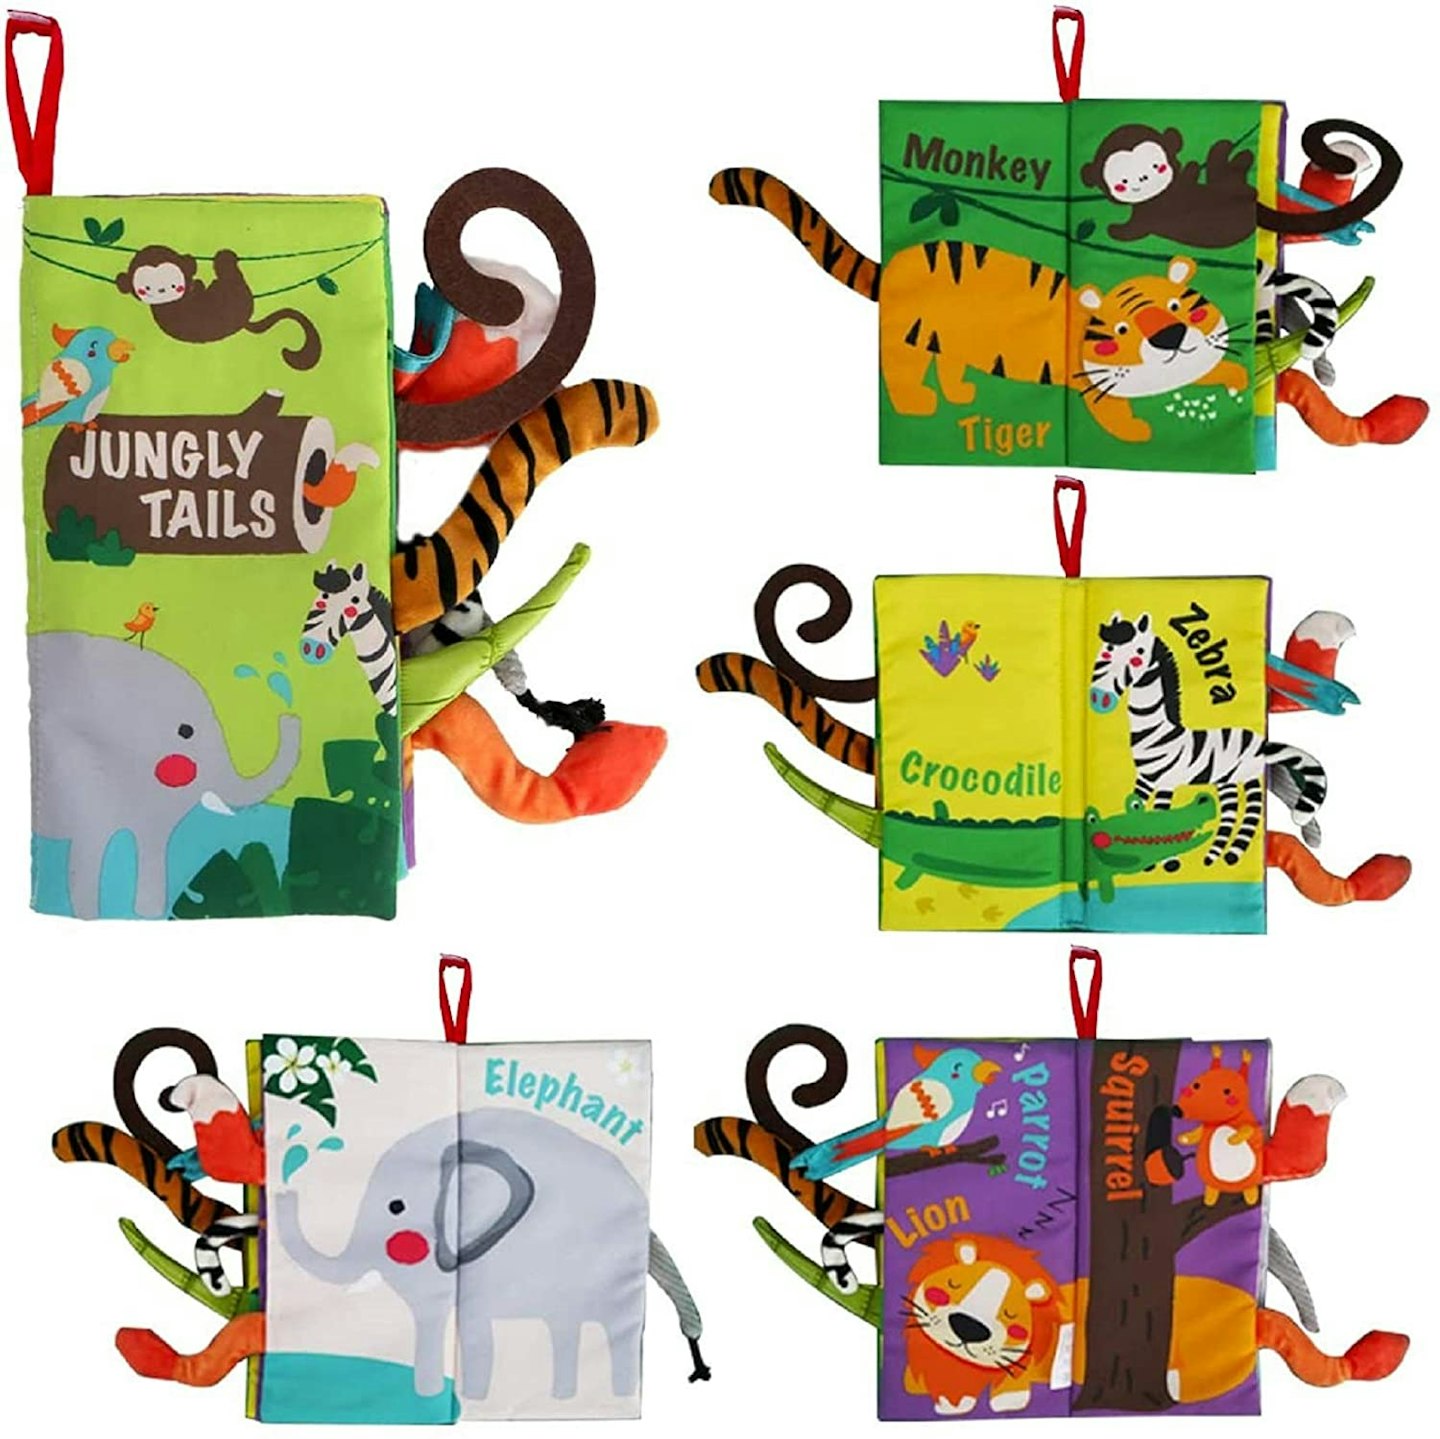  Jollybaby Baby Cloth Books, Touch & Feel Crinkle Soft Books,  for Infants Babies, Toddler Early Educational Interactive Stroller Toys,  Baby Girl & Boy Gift(Dinosaur Tails) : Toys & Games